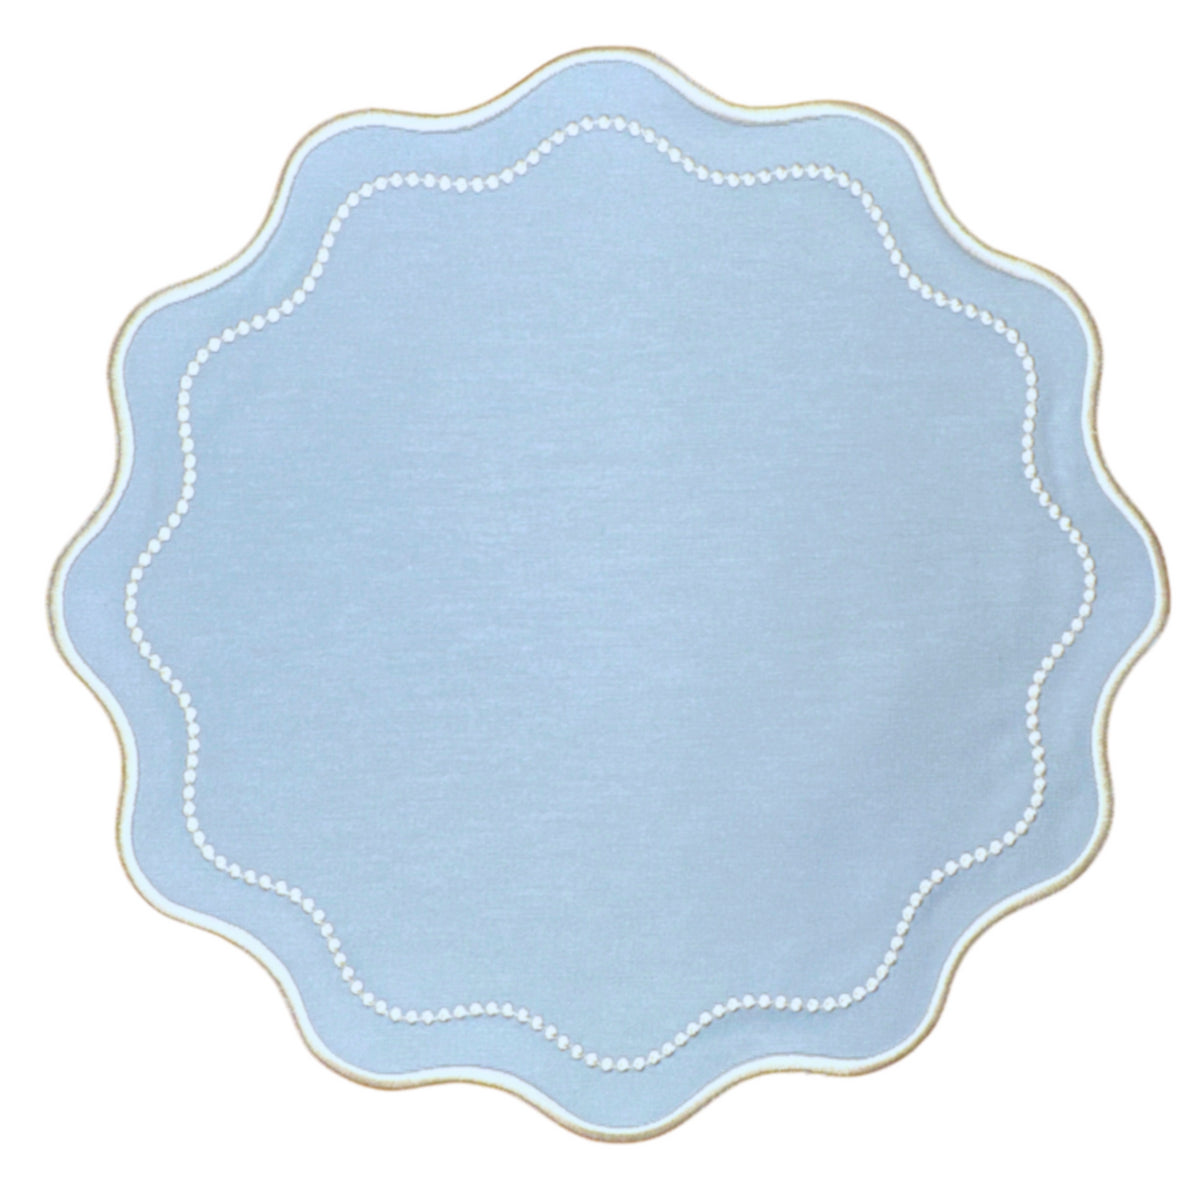 Waverly Placemat in Blue, Set of 4